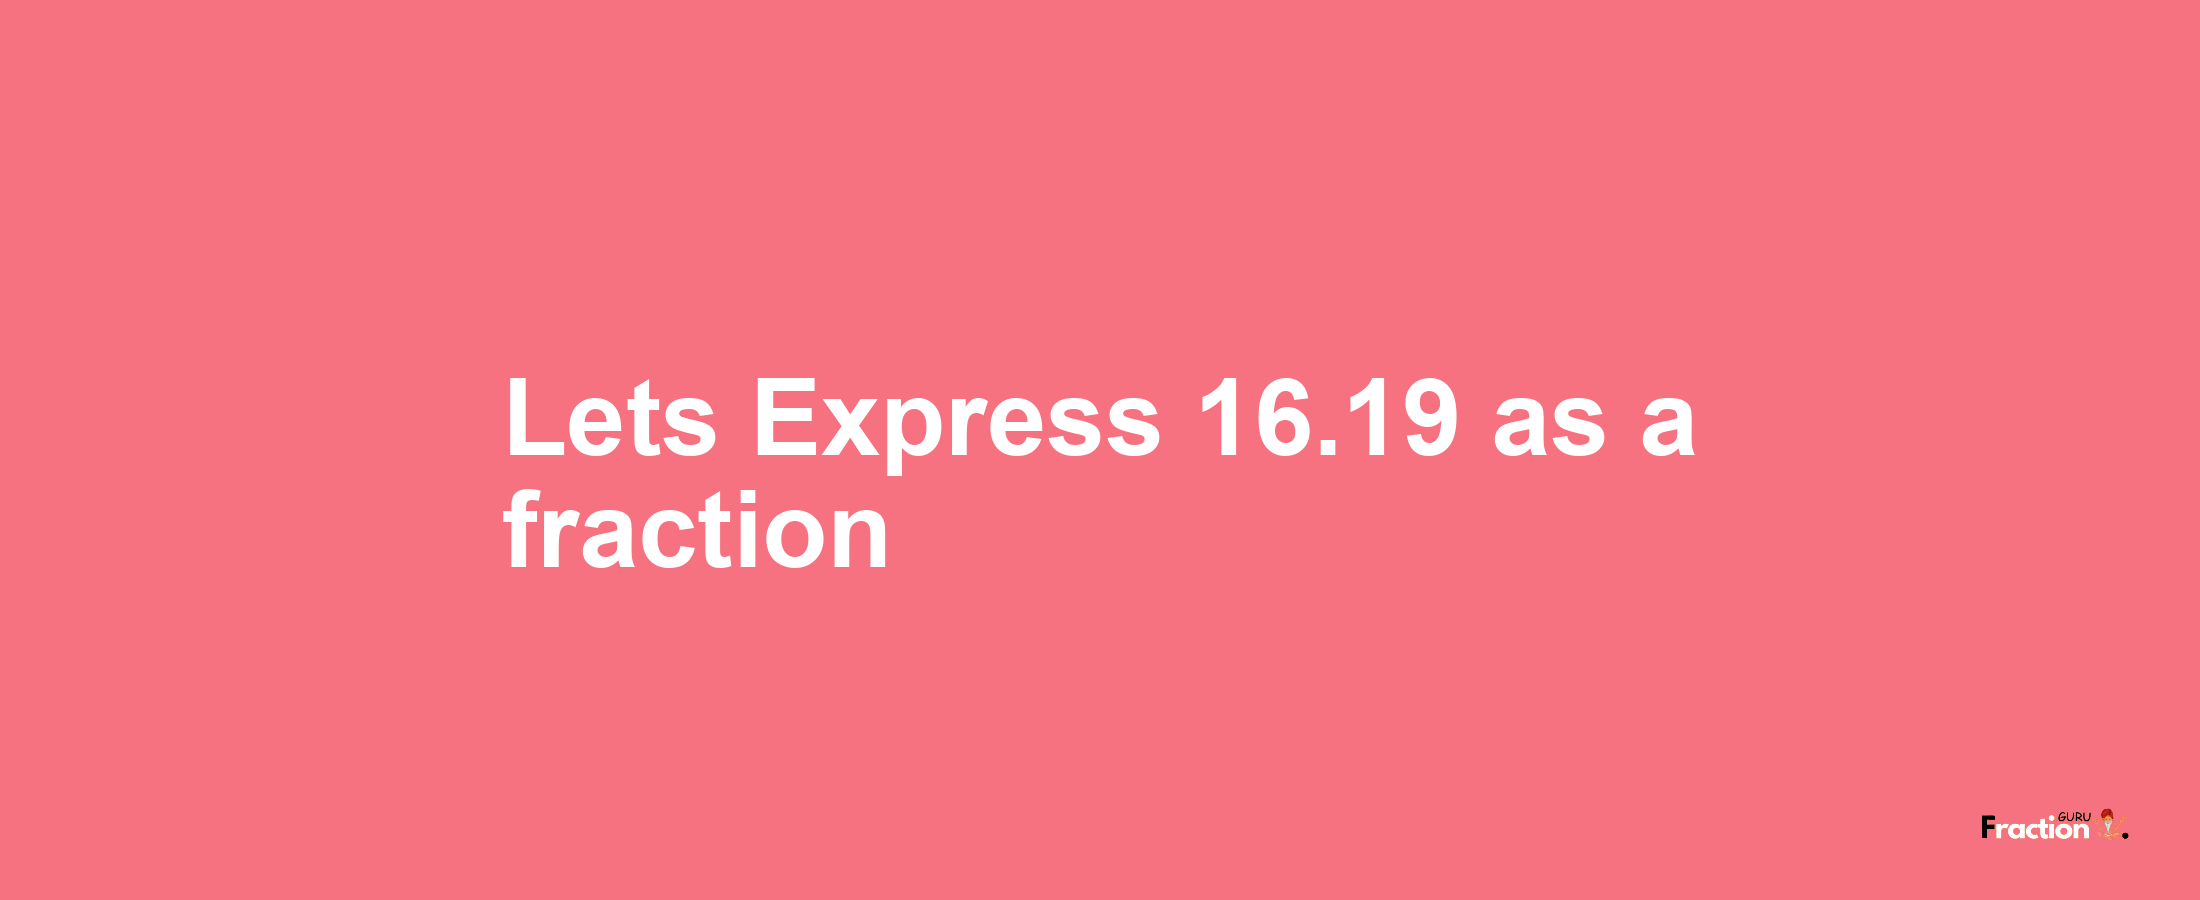 Lets Express 16.19 as afraction